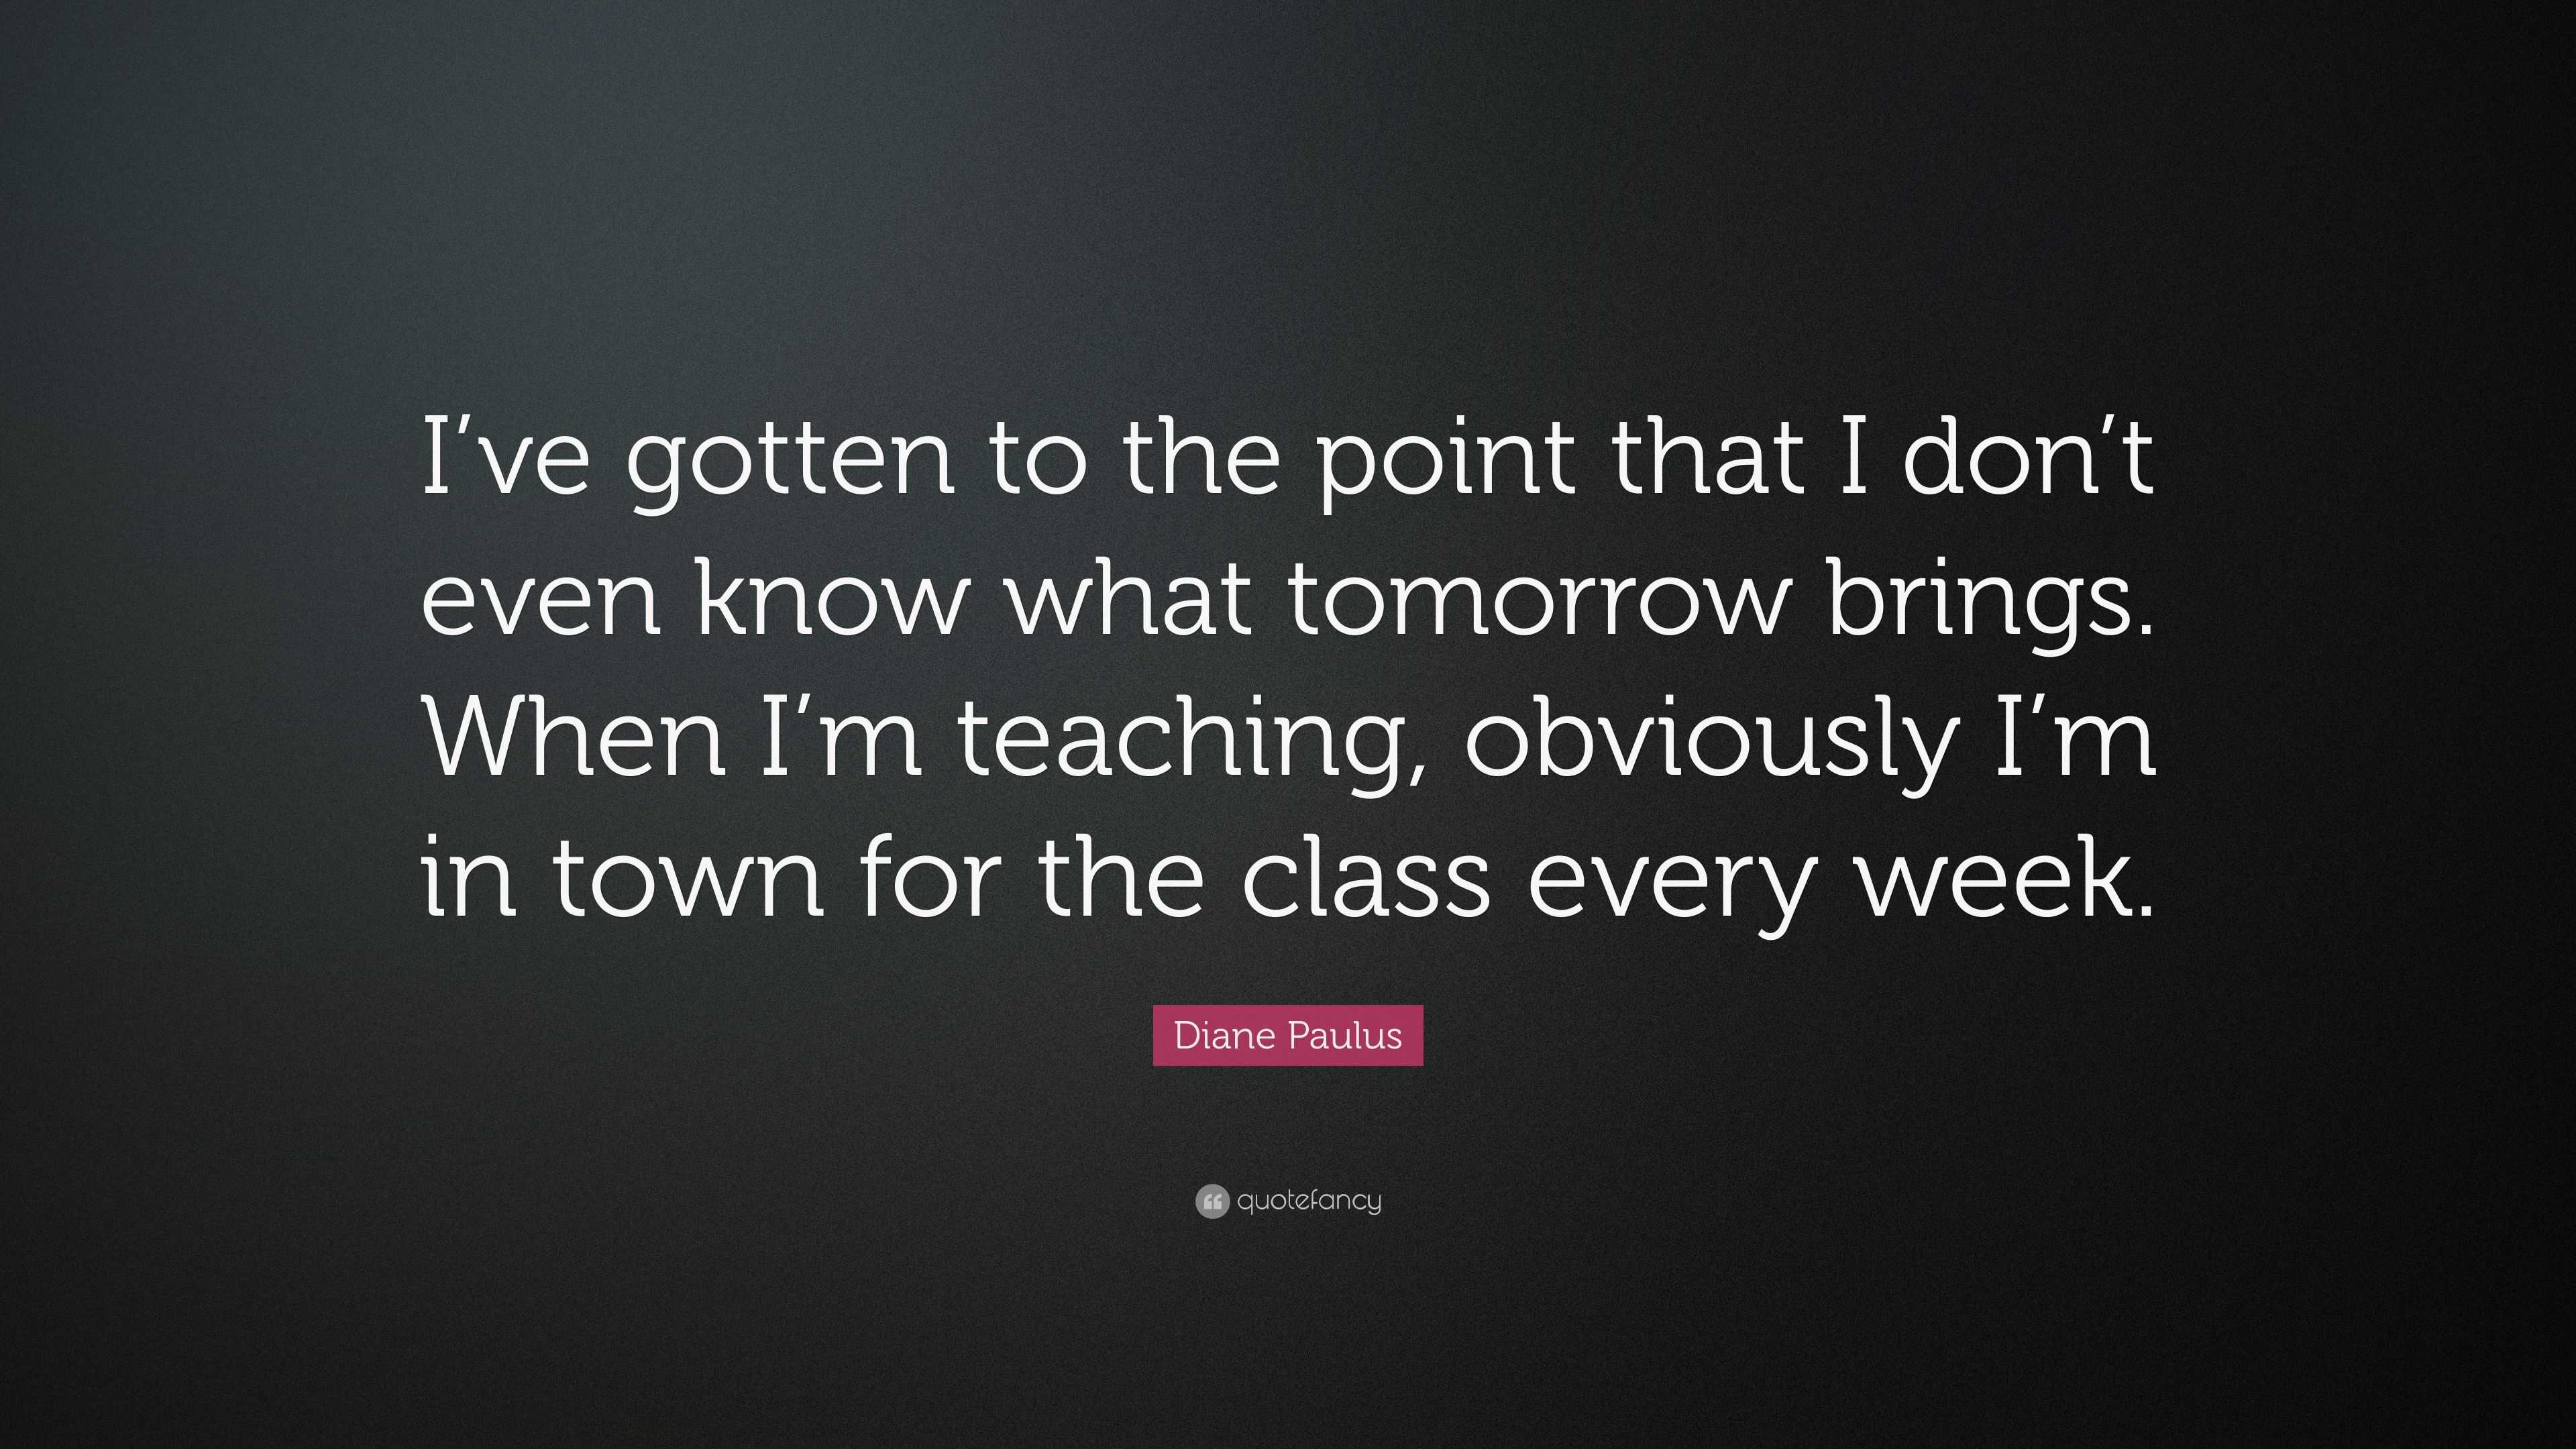 Diane Paulus Quote: “I've gotten to the point that I don't even